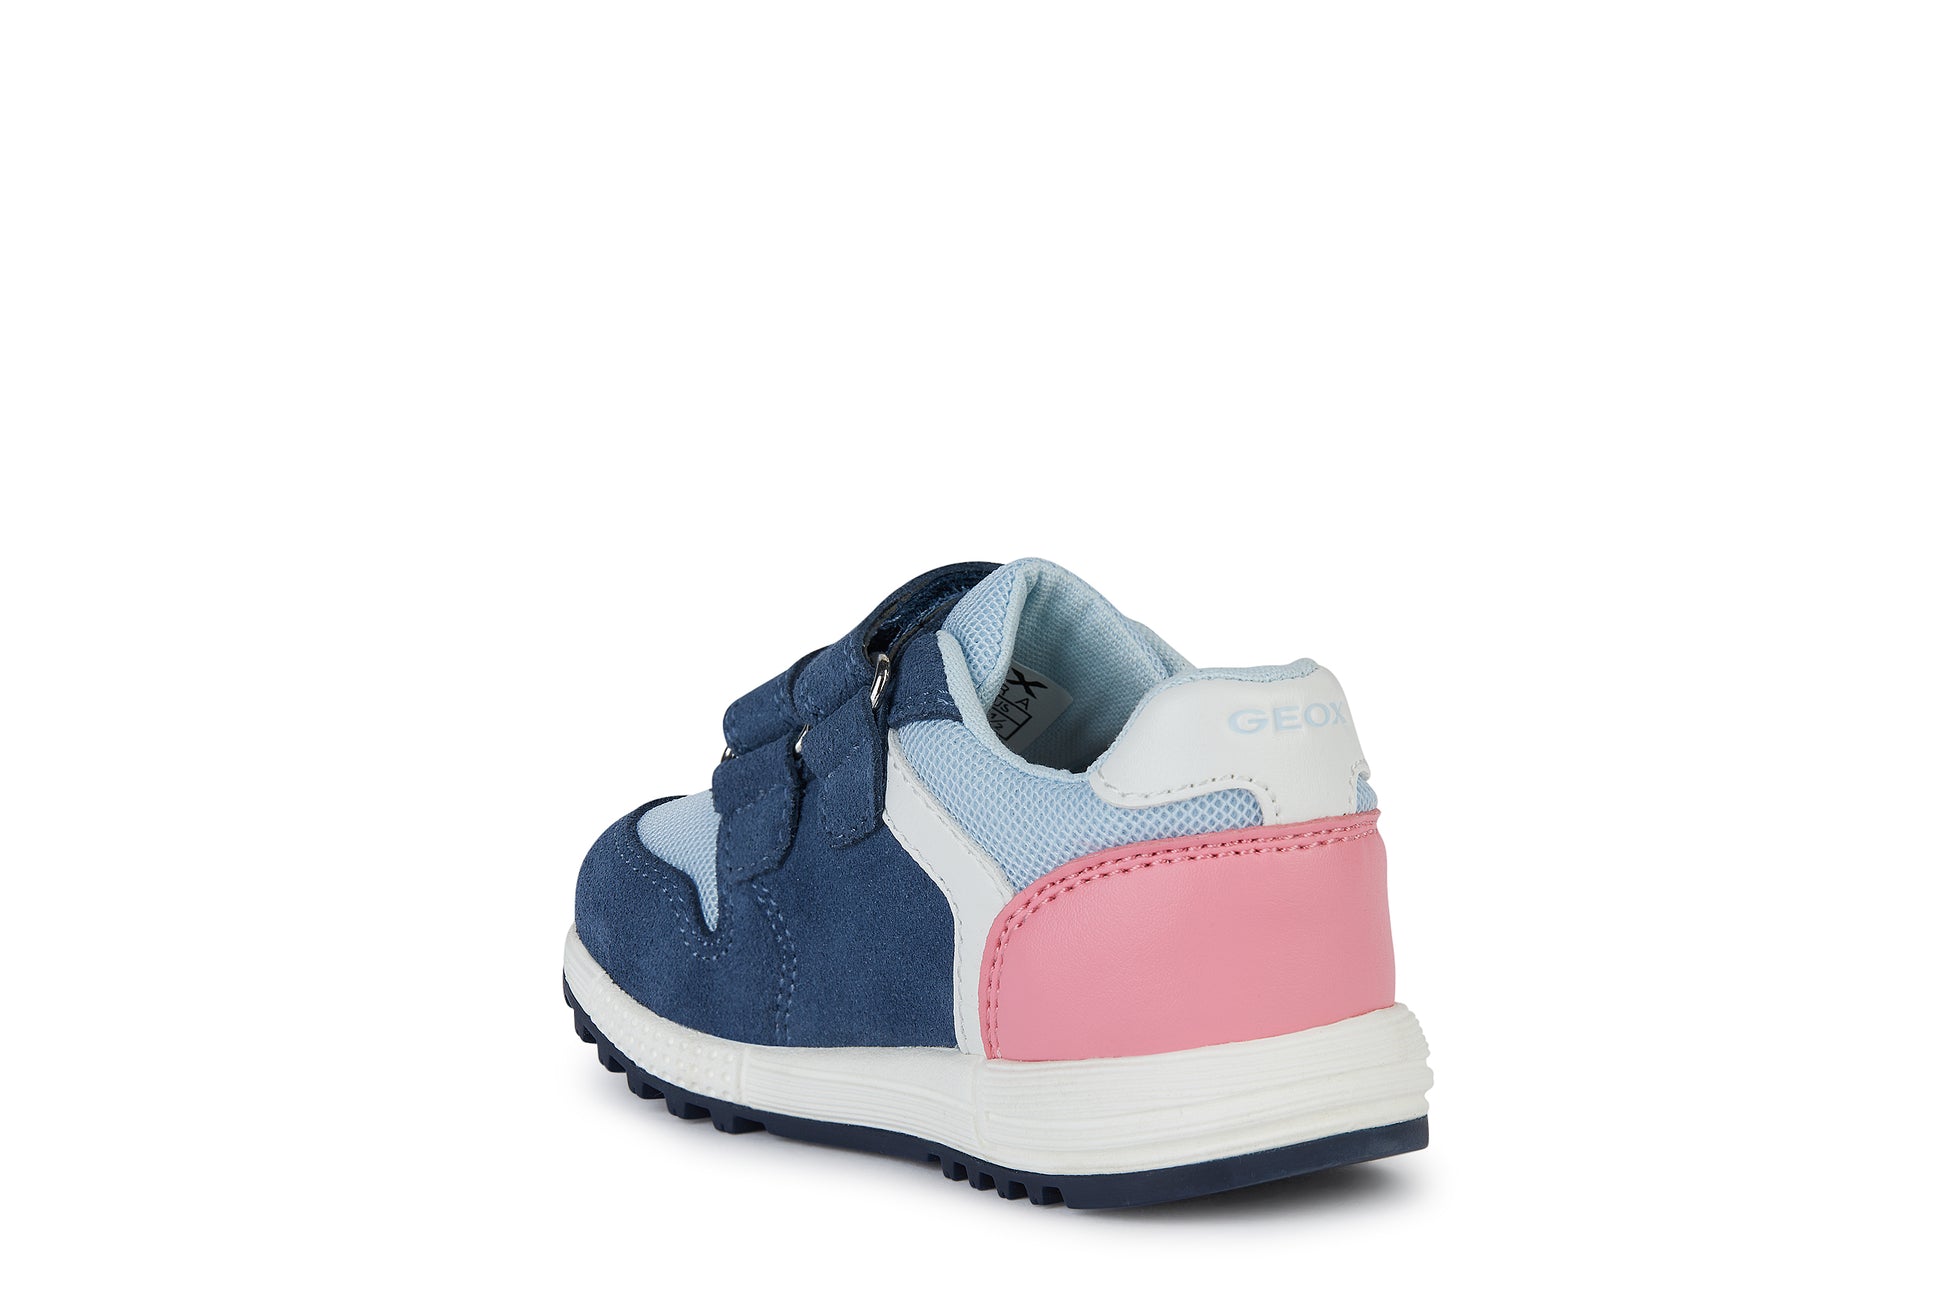 A girls trainer by Geox, style B Alben, in blue, pink and white with double velcro fastening. Angled left side view.